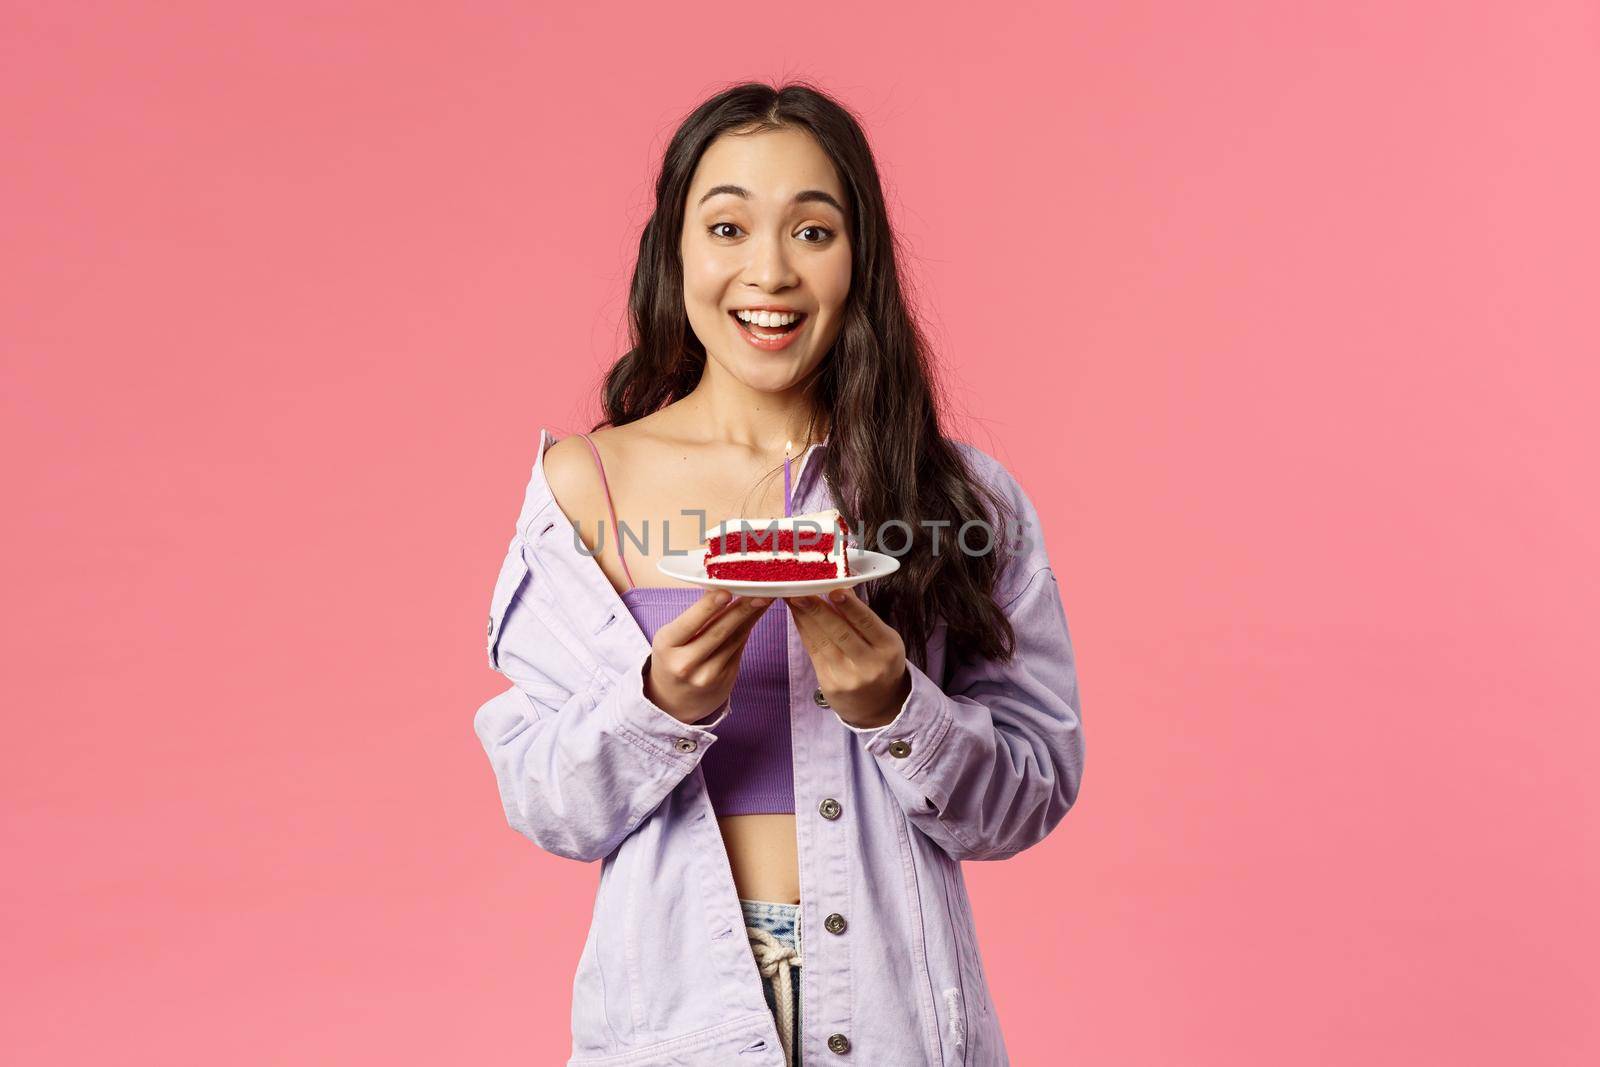 Portrait of cheerful, happy young cute woman baked a dessert special for you, holding piece of cake on plate, suggesting try it, smiling amused and excited, eating favorite food, pink background.